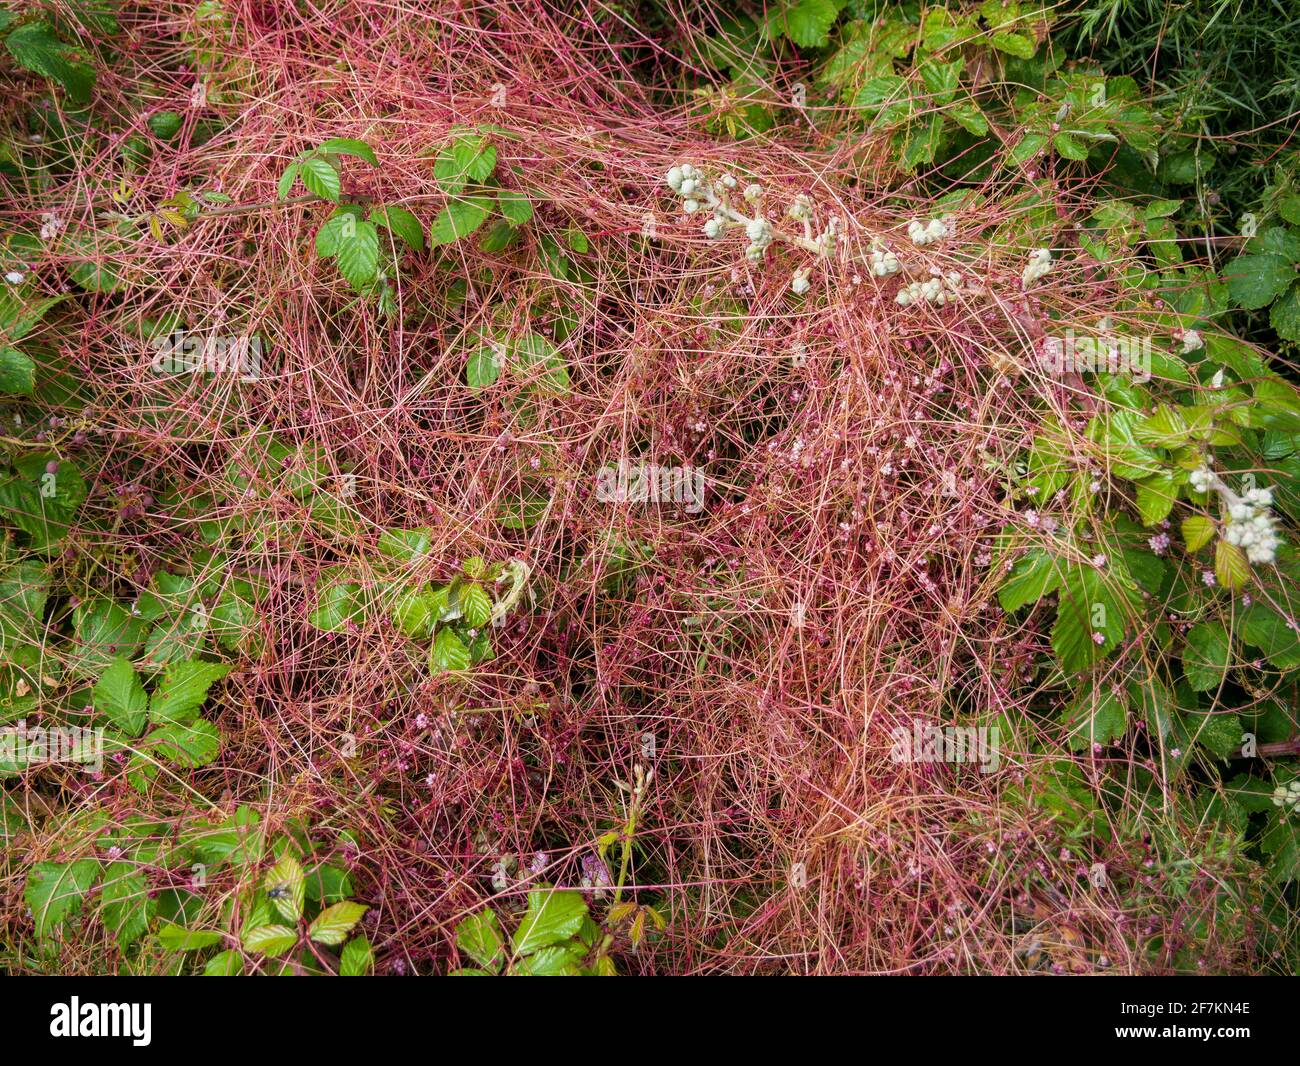 The parasitic bindweed Dodder (Cuscuta epithymum) growing on bramble (Rubus fruticosus) on the North Devon Coast Area of Outstanding Natural Beauty, England. Stock Photo